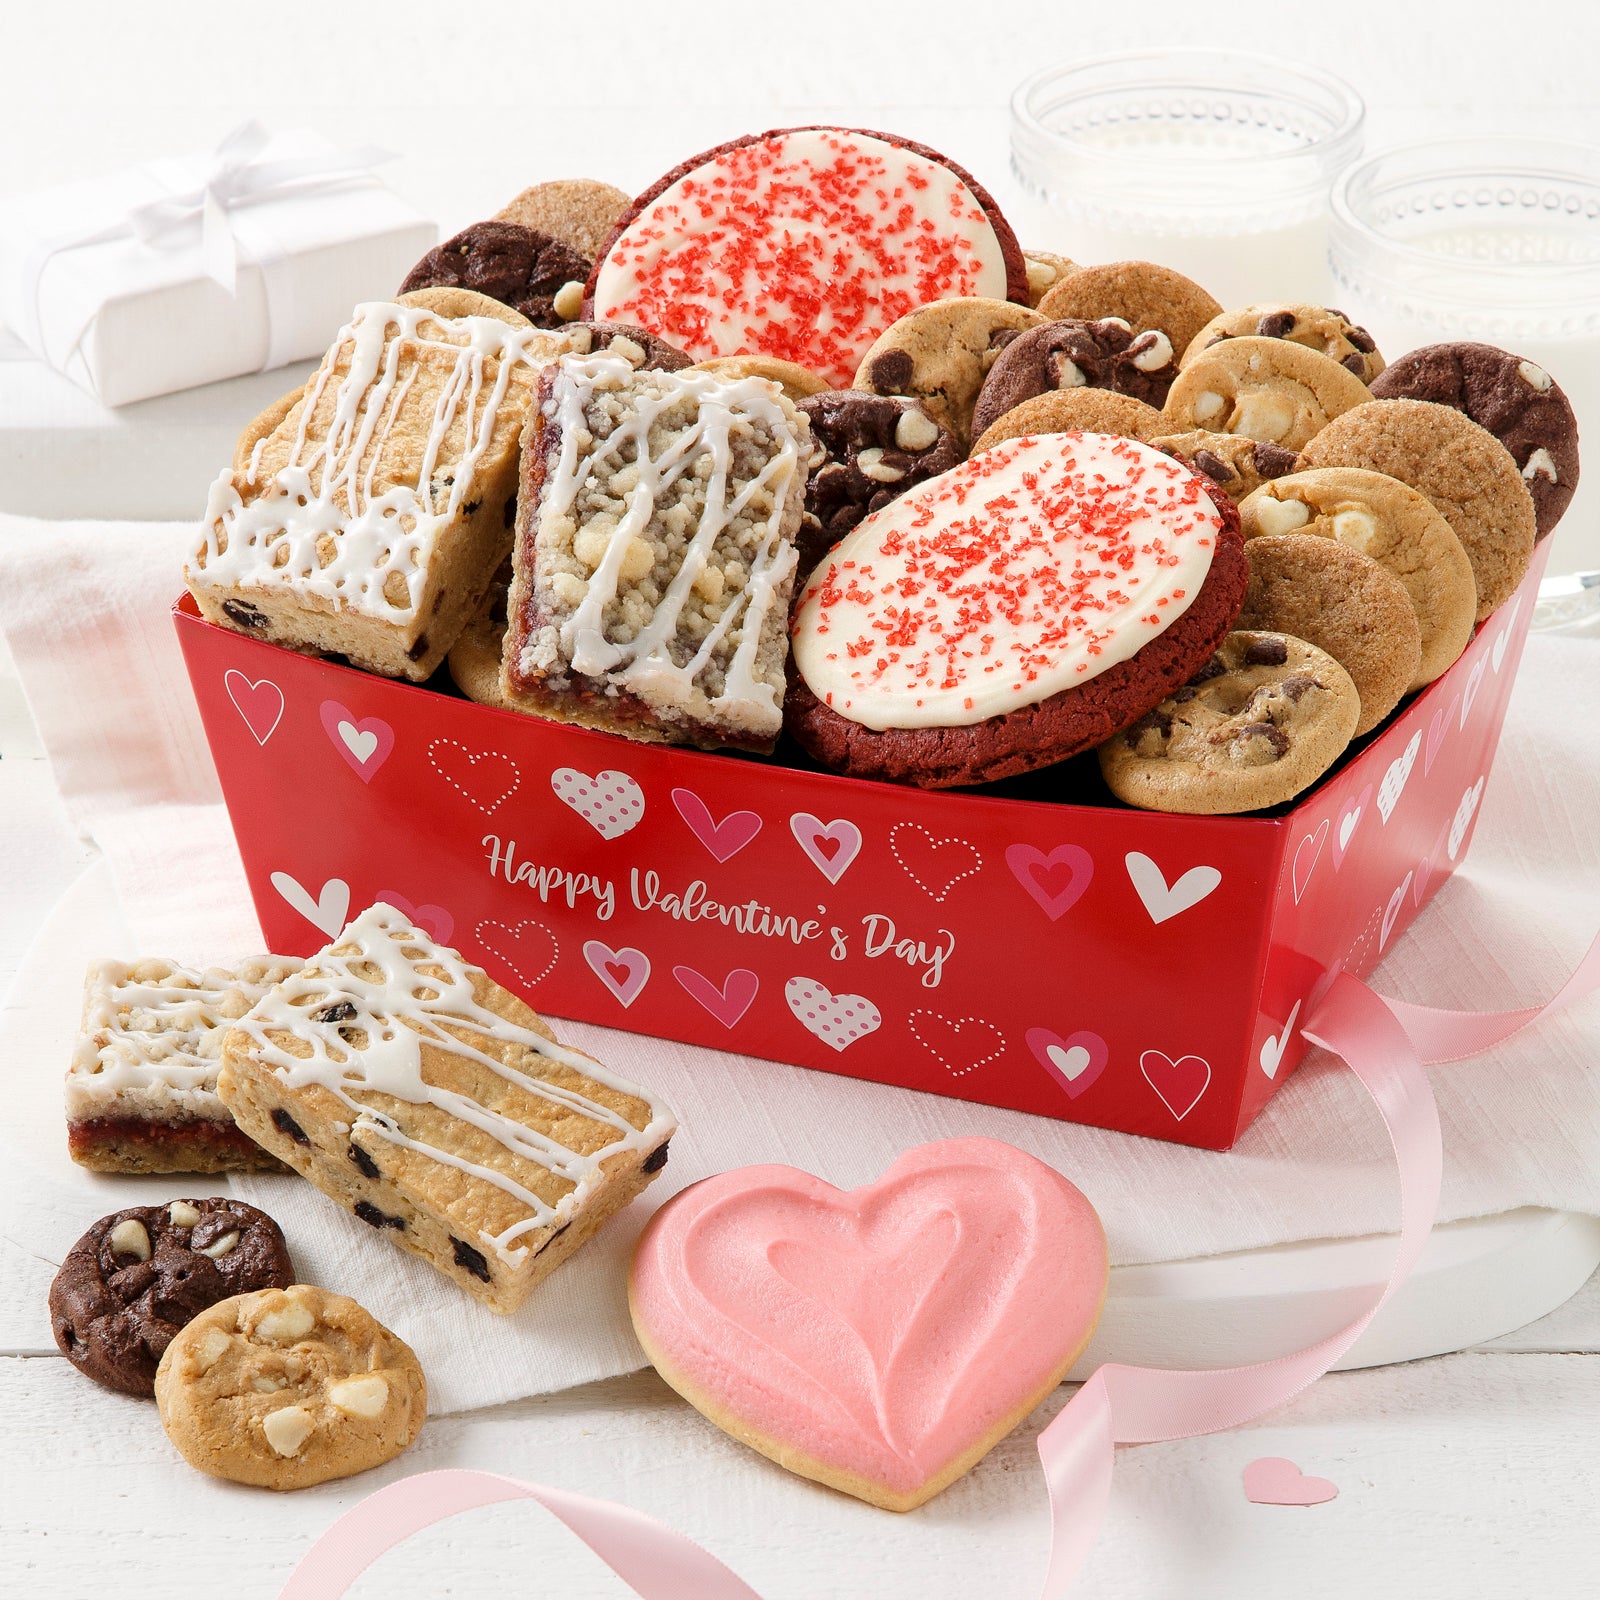 A red with hearts gift crate filled with an assortment of nibblers, fruit bars, two red velvet frosted cookies, and one frosted heart cookie